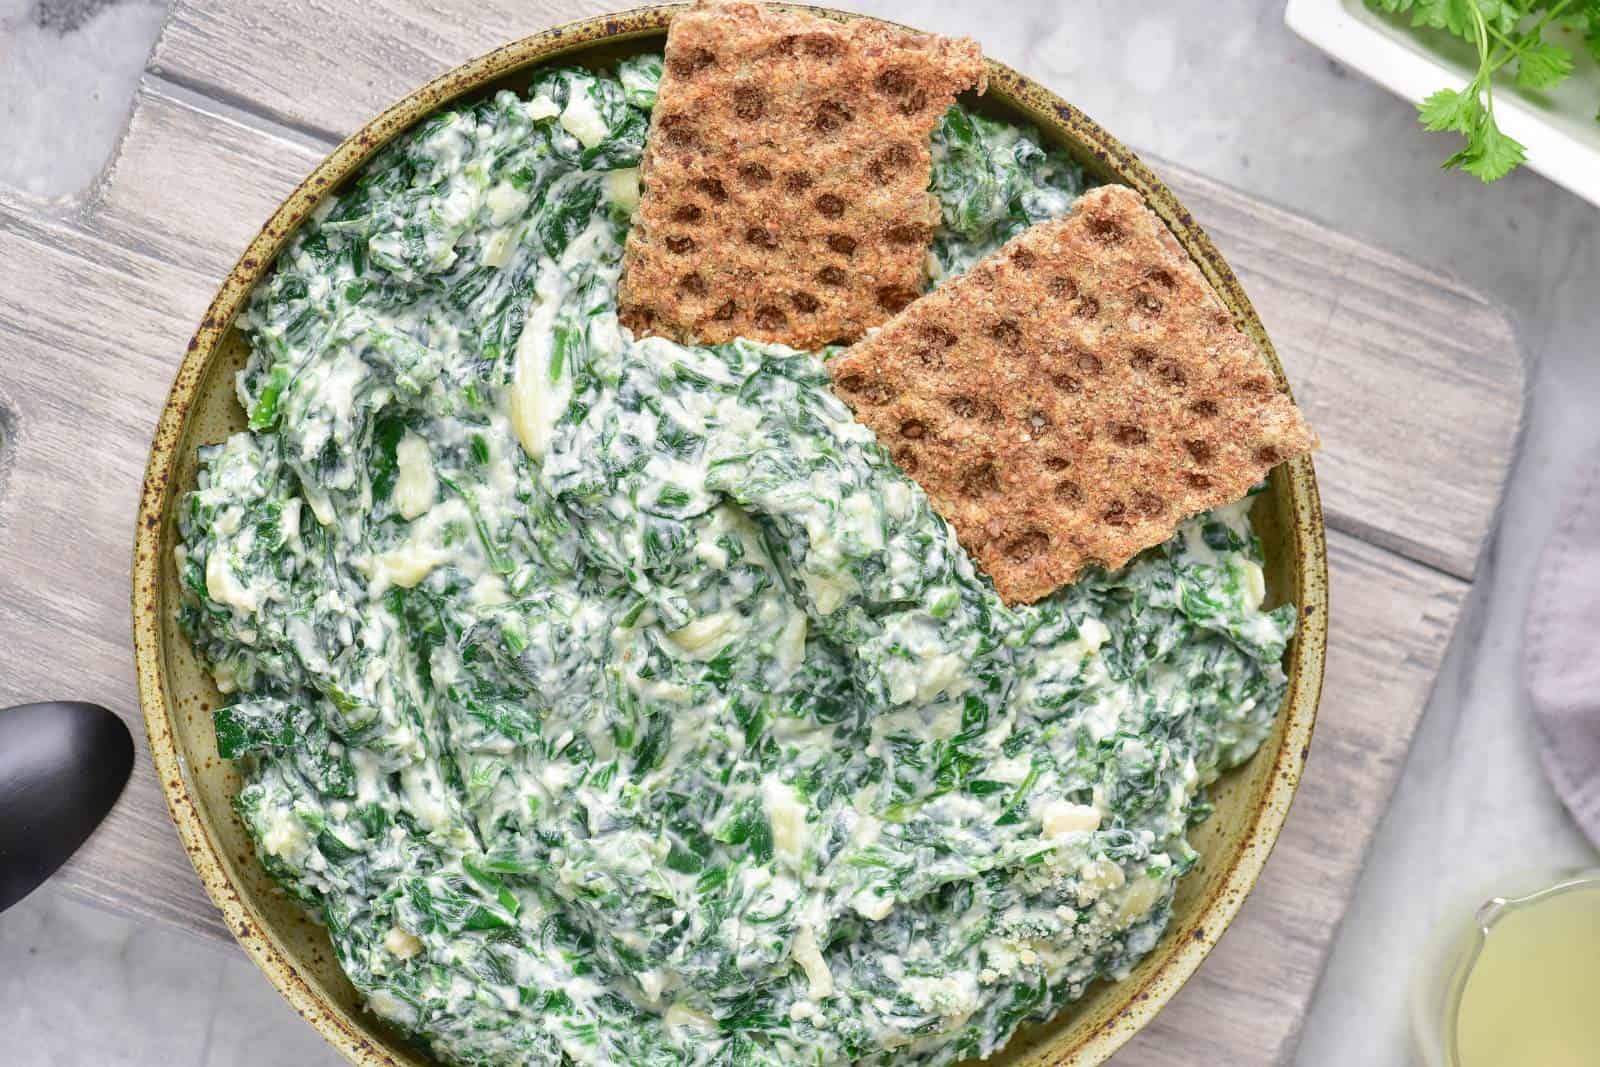 A bowl of creamy spinach artichoke dip with two pieces of crispbread on top. The bowl is placed on a wooden board.